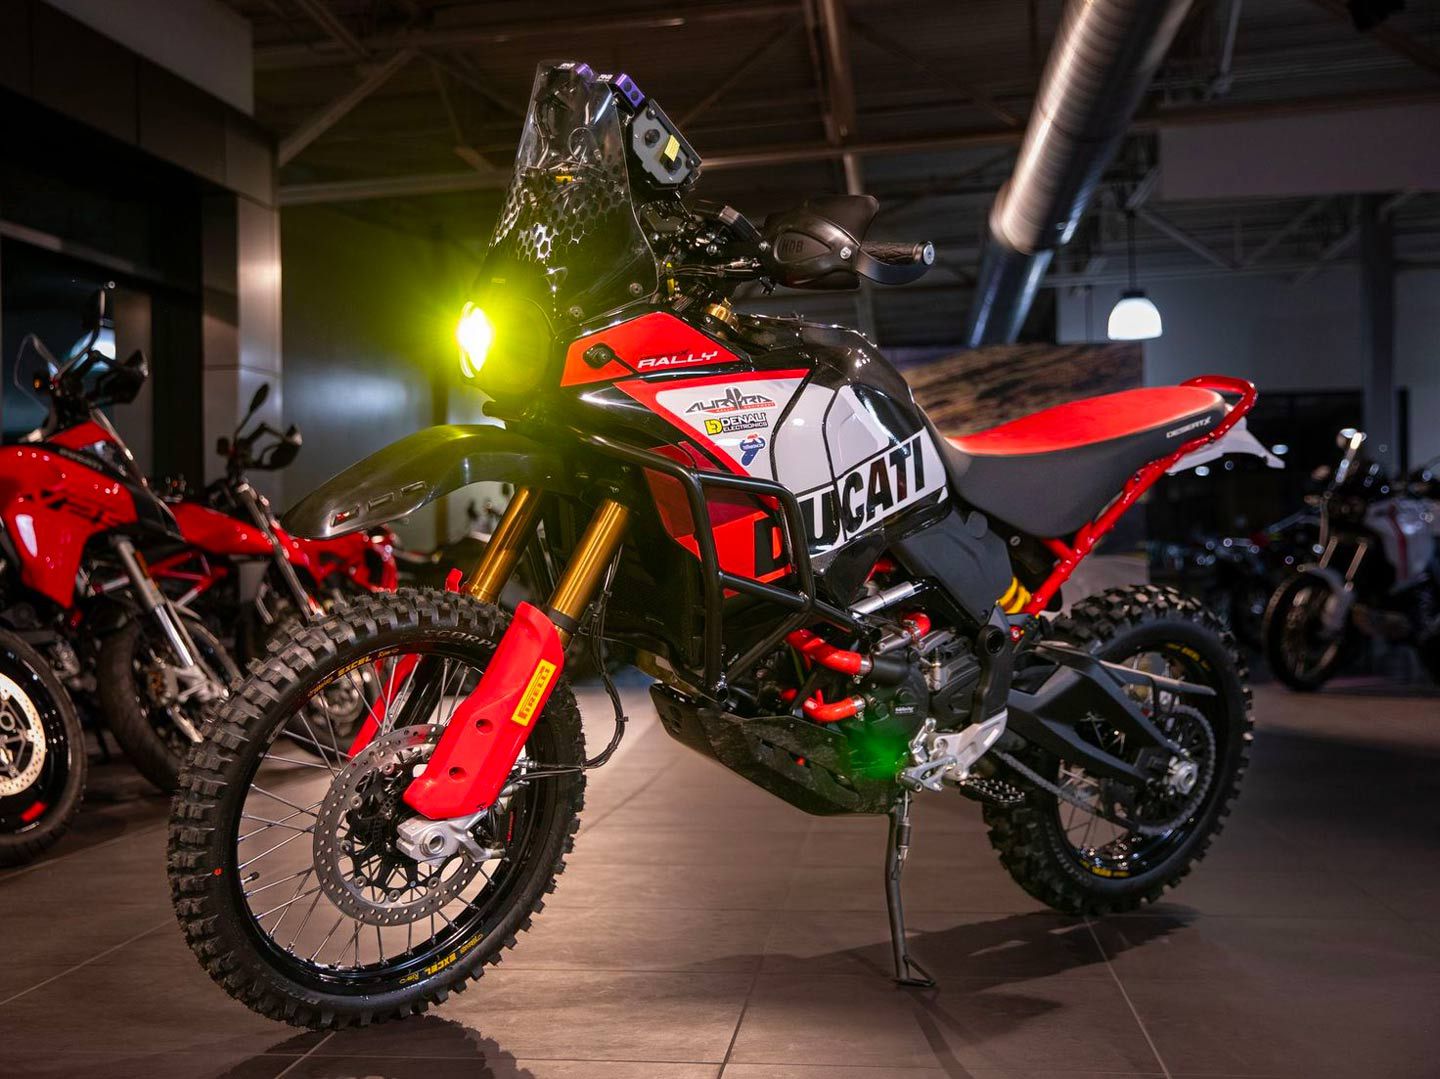 Ducati North America Announces its Entry Into the NORRA Mexican 1000 with the Ducati DesertX Rally